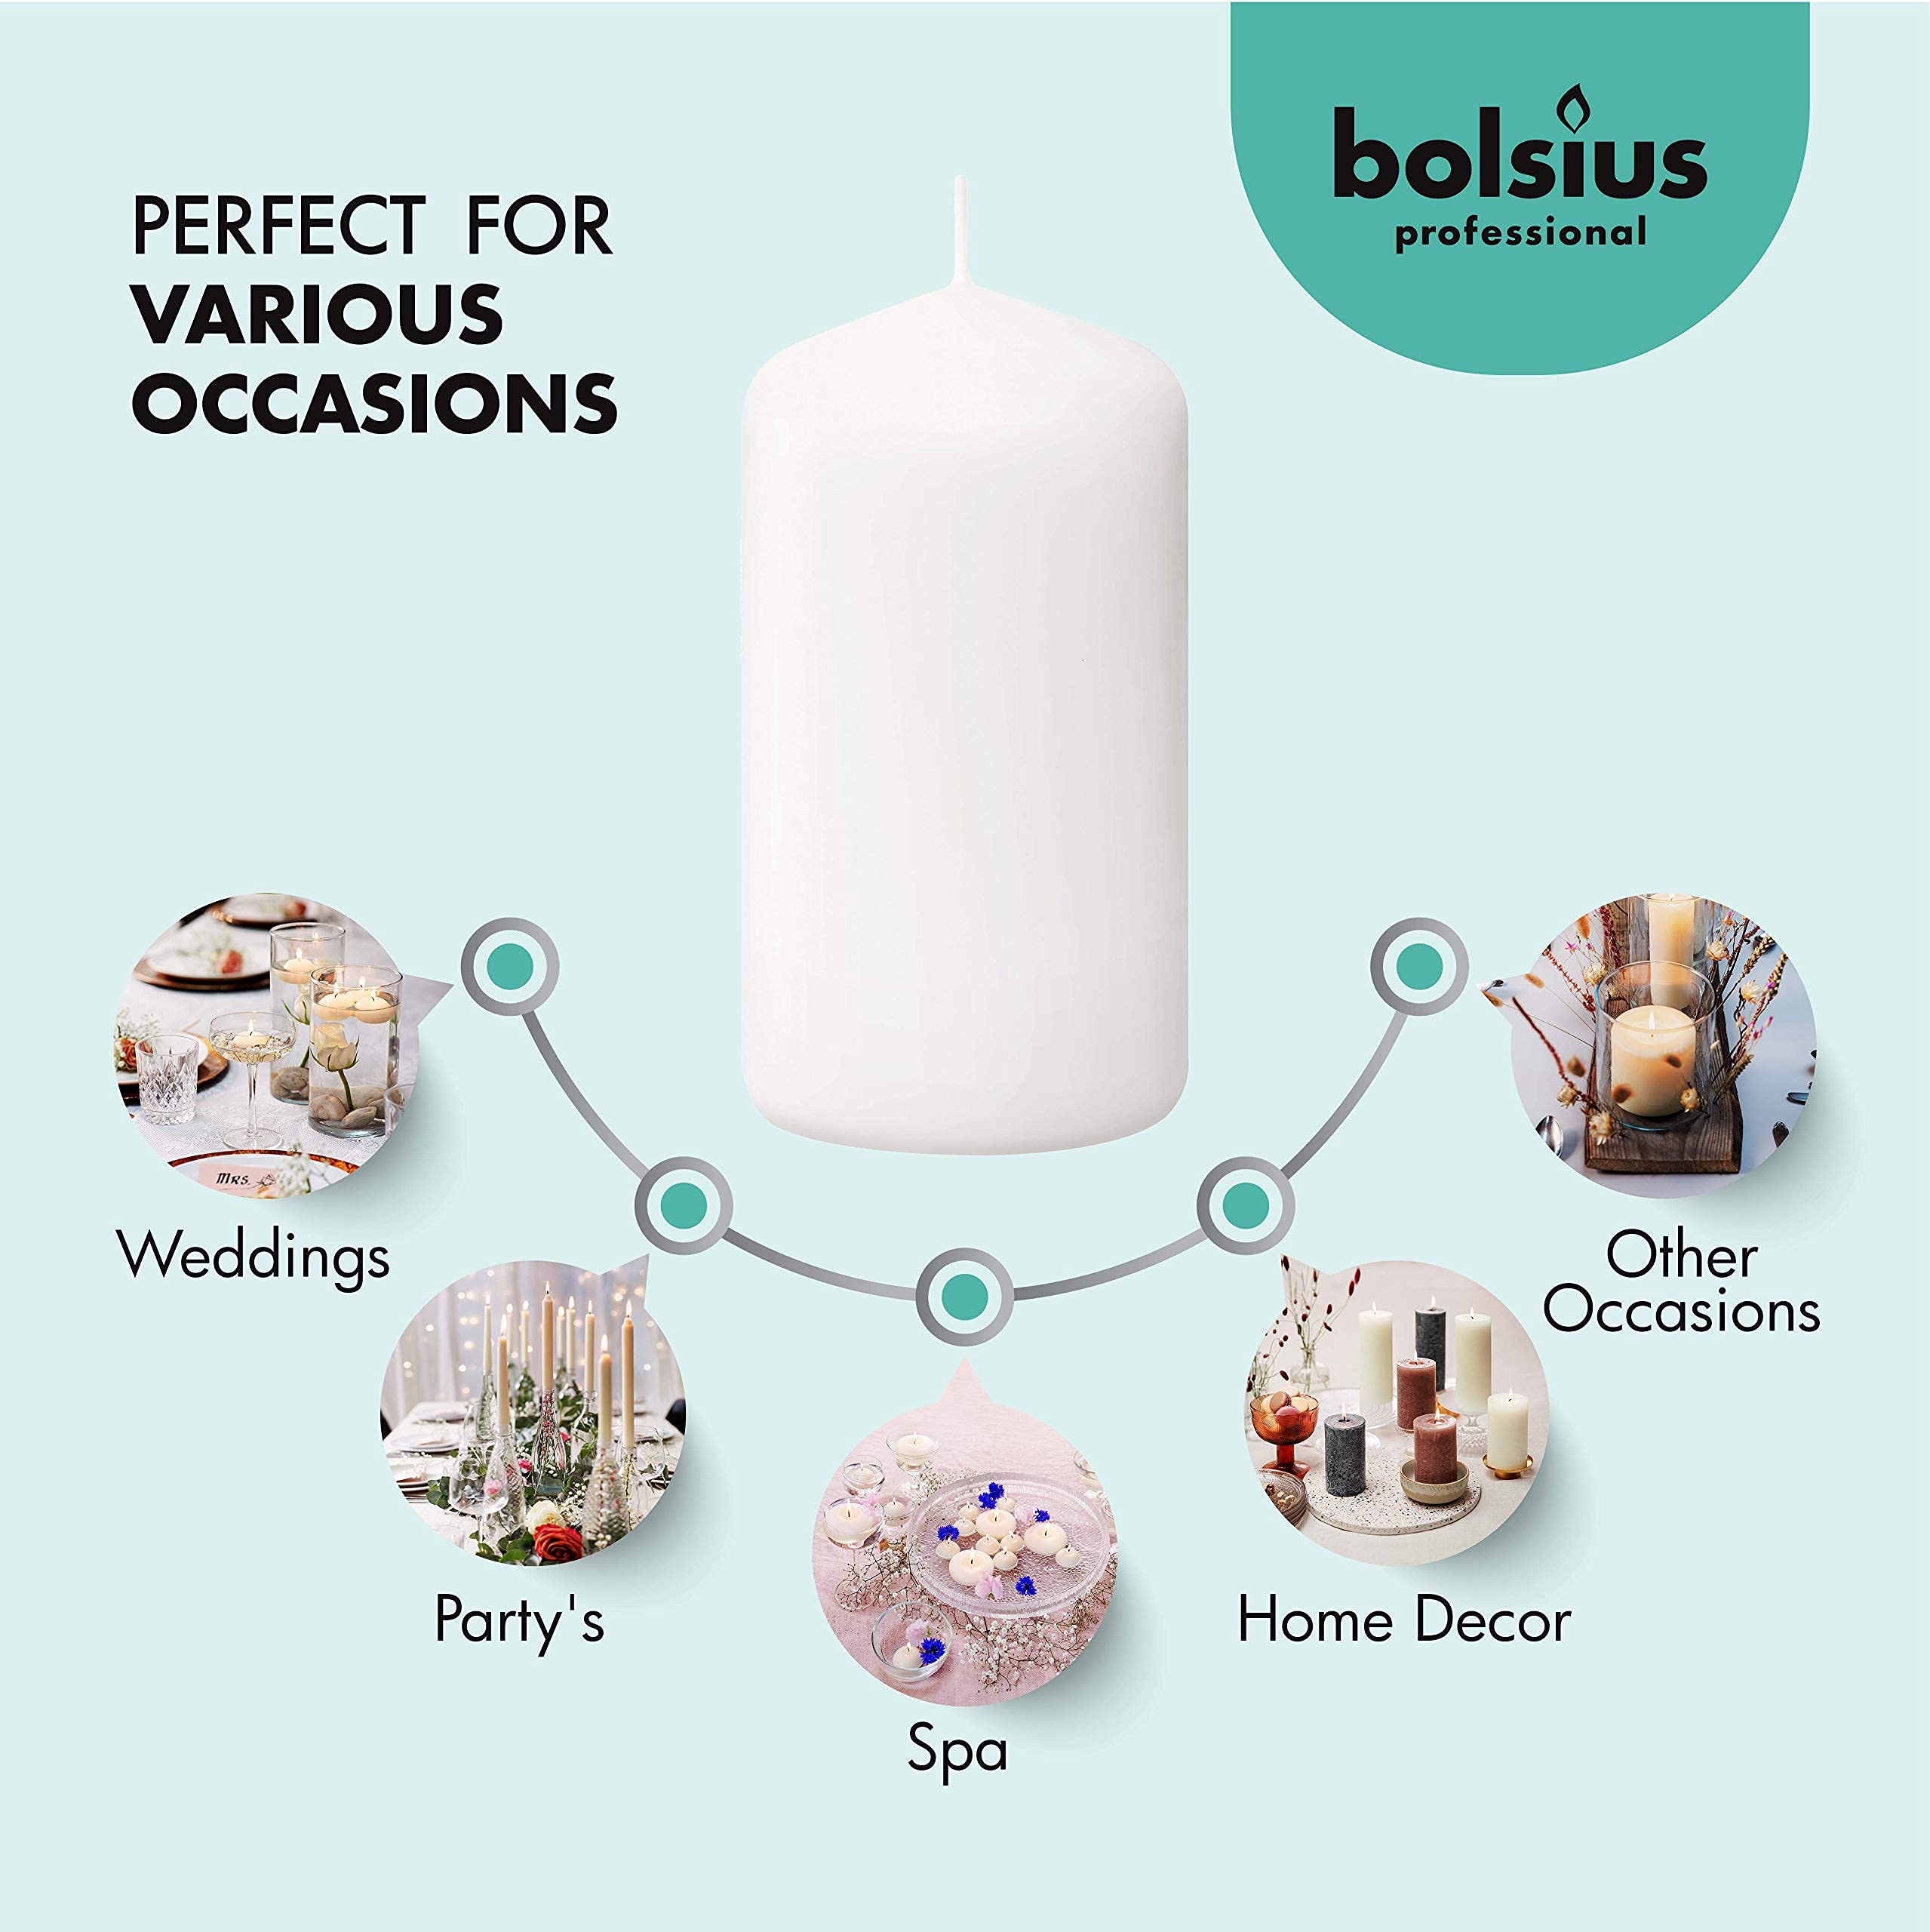 Bolsius White Pillar Candles – Unscented Candle Set of 20 – Dripless, Smokeless, and Clean Burning Household Dinner Candles – Perfect for Weddings, Parties, Dinners – 20 Decorative Candles  - Acceptable